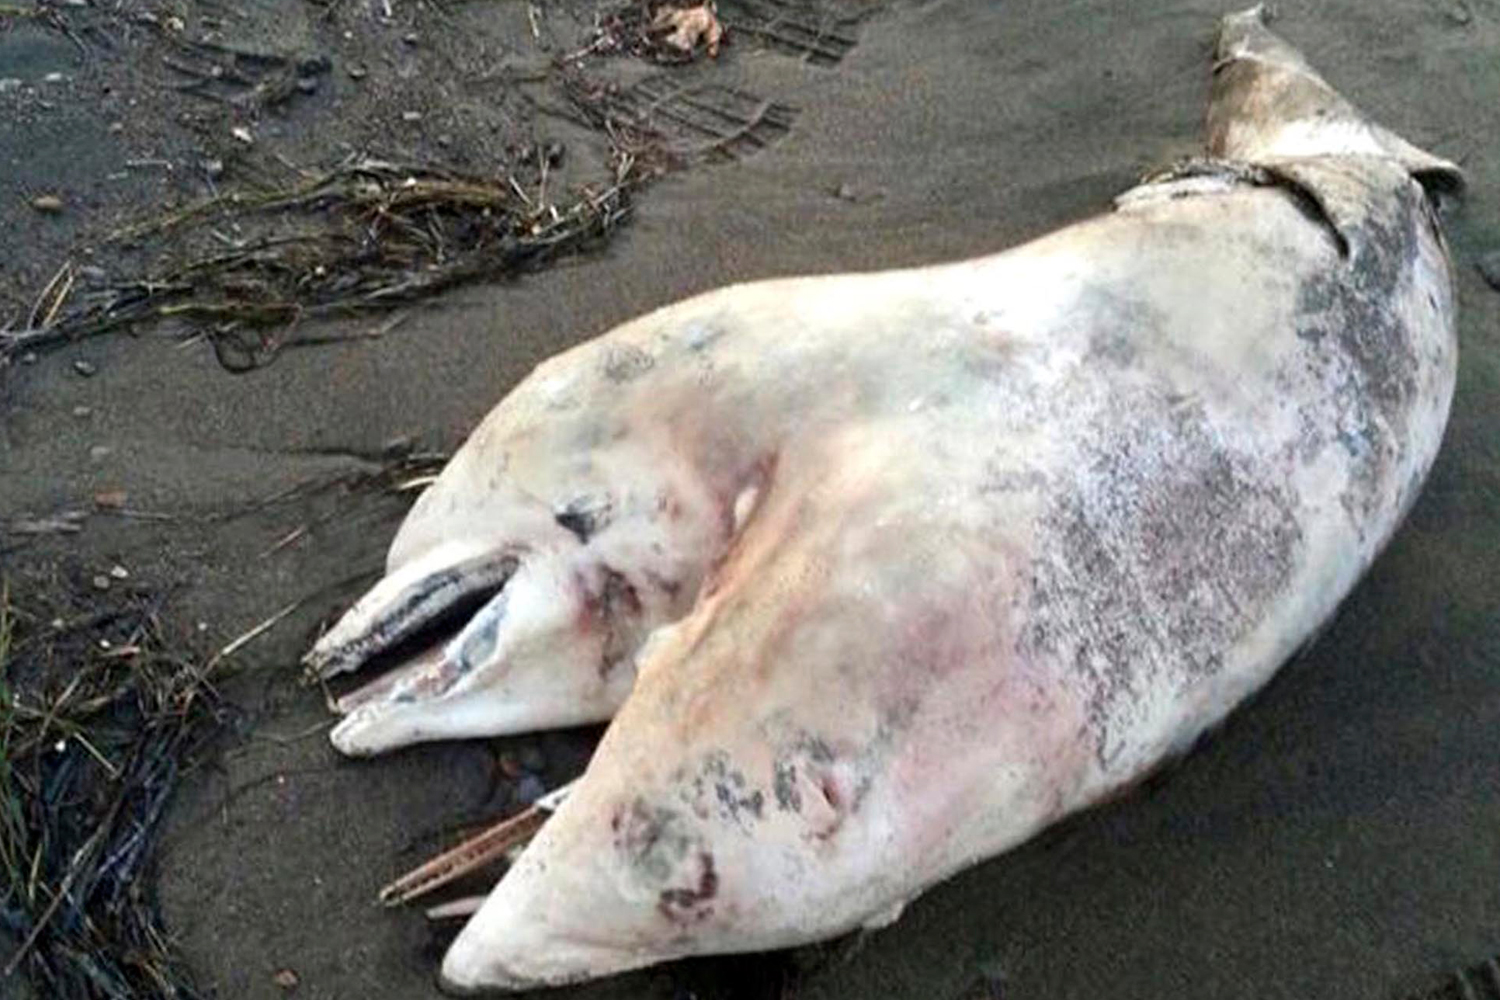 Two-Headed Dolphin Washes Up on Beach in Turkey Dead | Time